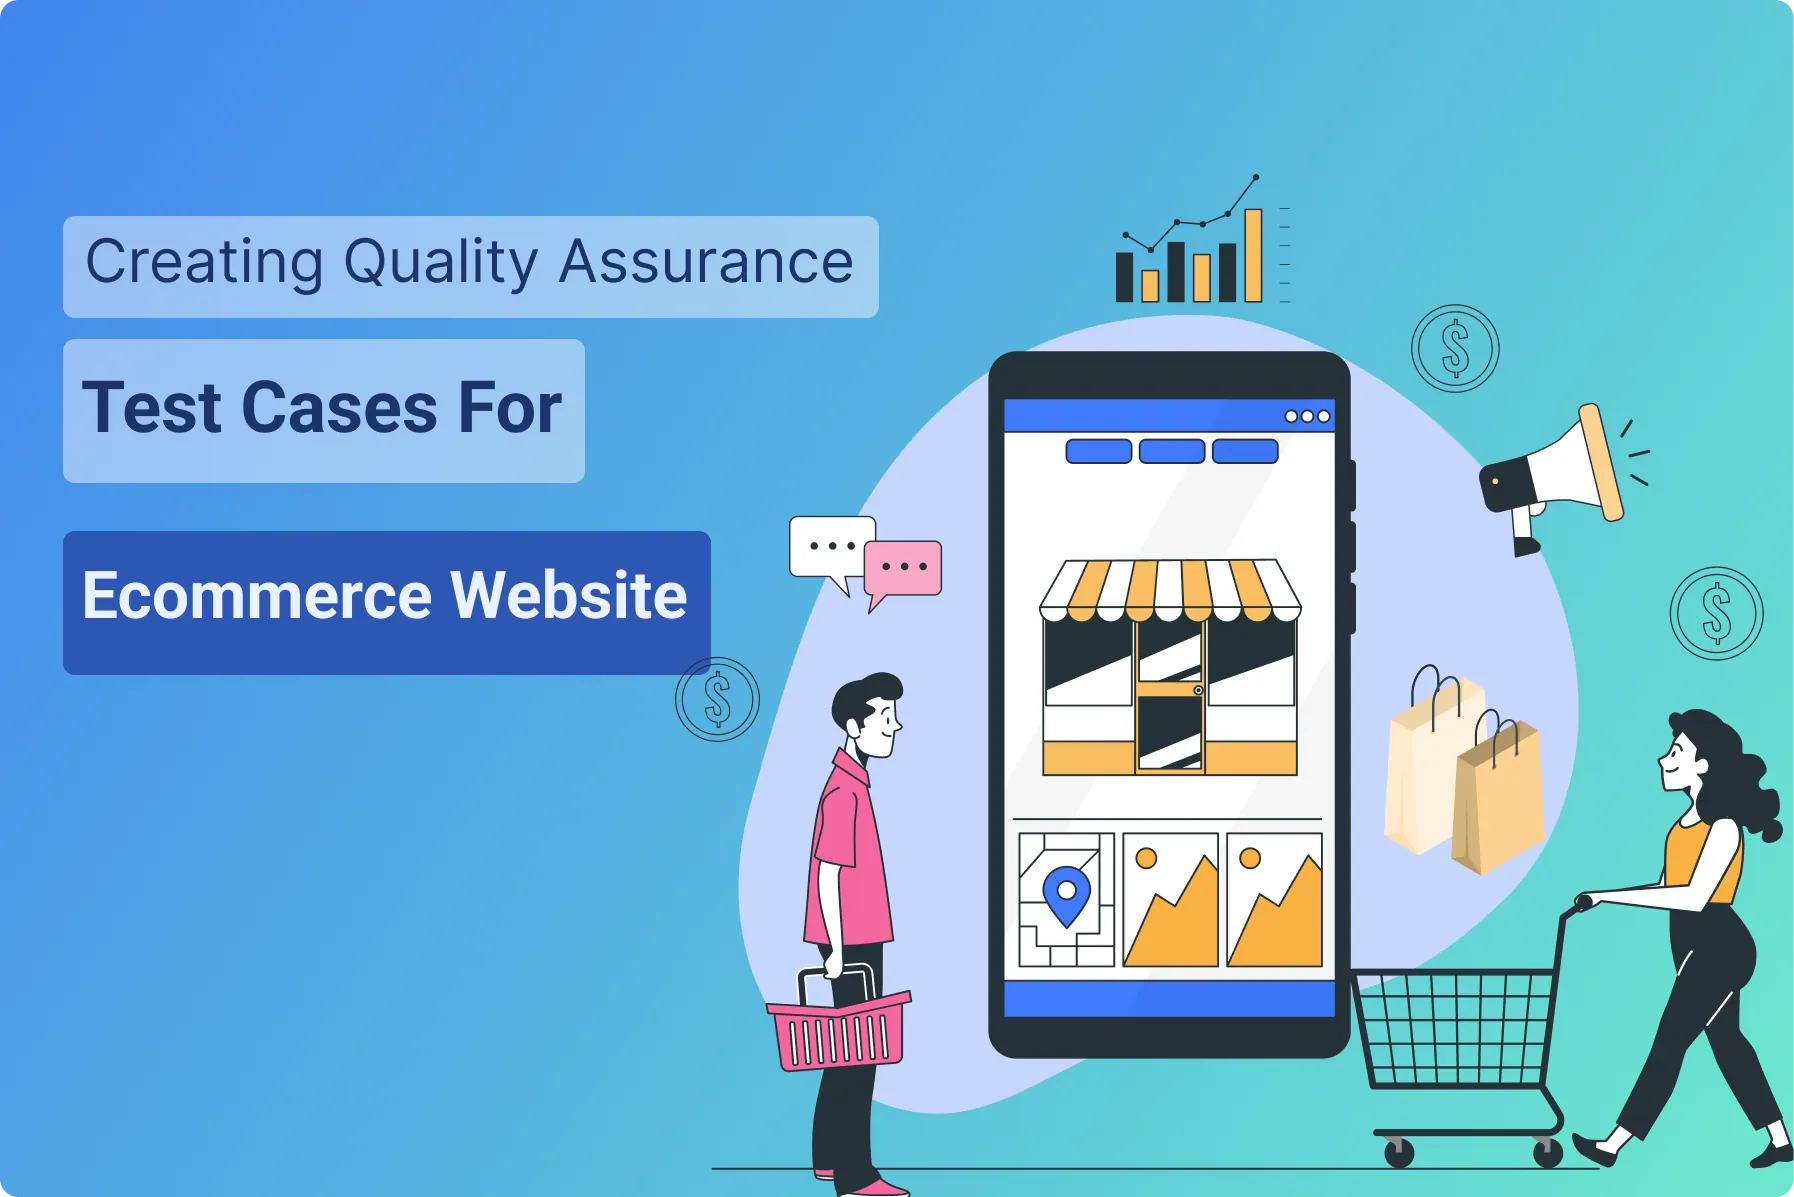 Creating Quality Assurance Test Cases for E-commerce Websites 